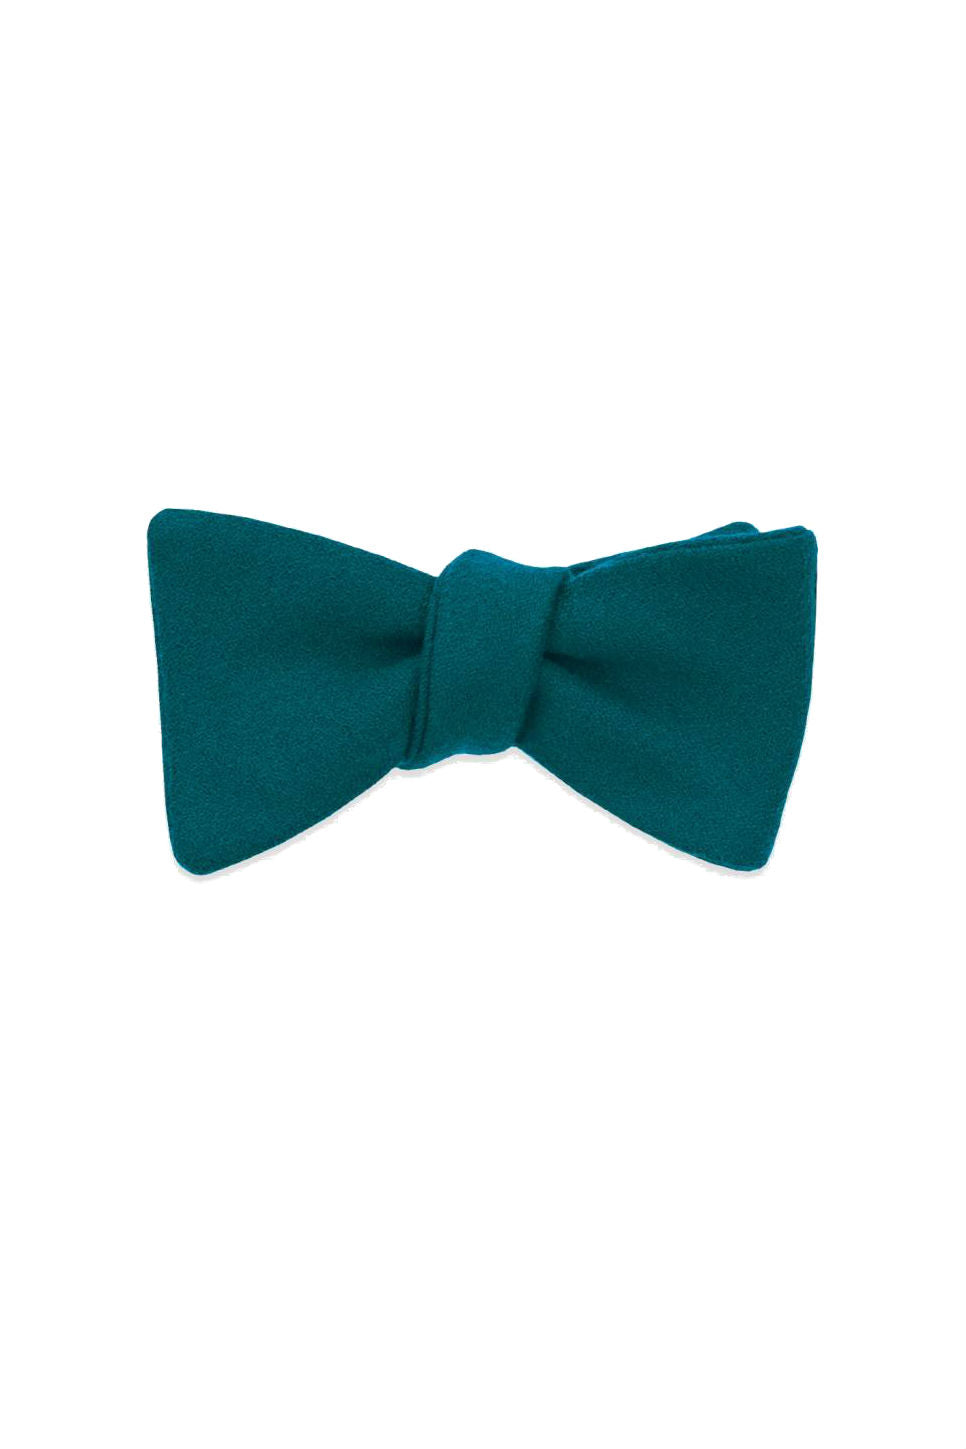 THE FREDERICK BOW TIE Green